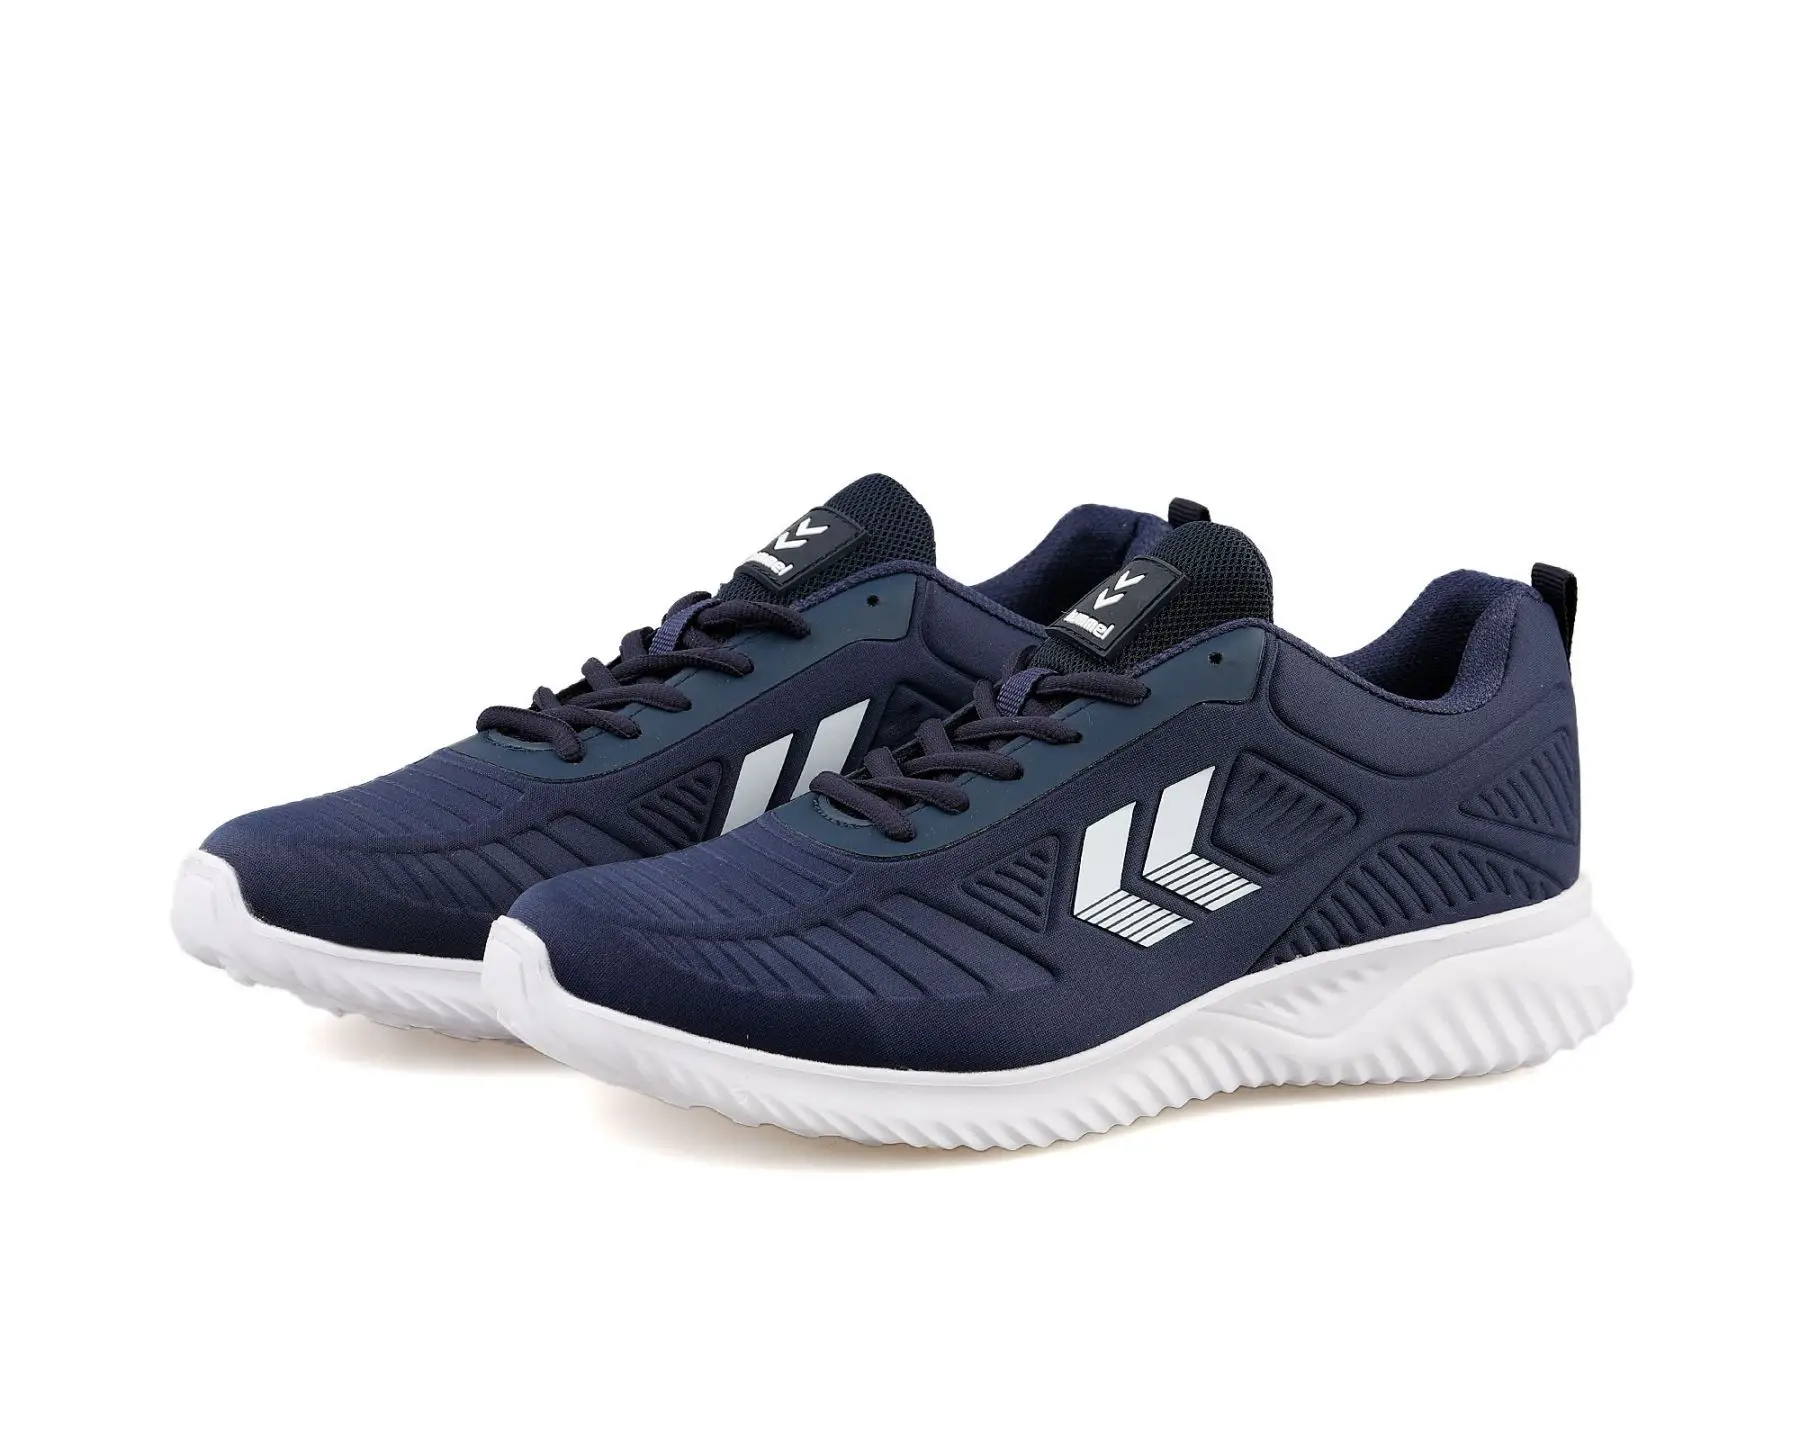 Hummel Original Unisex Sneakers Casual Sneakers Navy Blue Color Casual Walking Shoes Casual Men's and Women's Sneakers Hml Aria